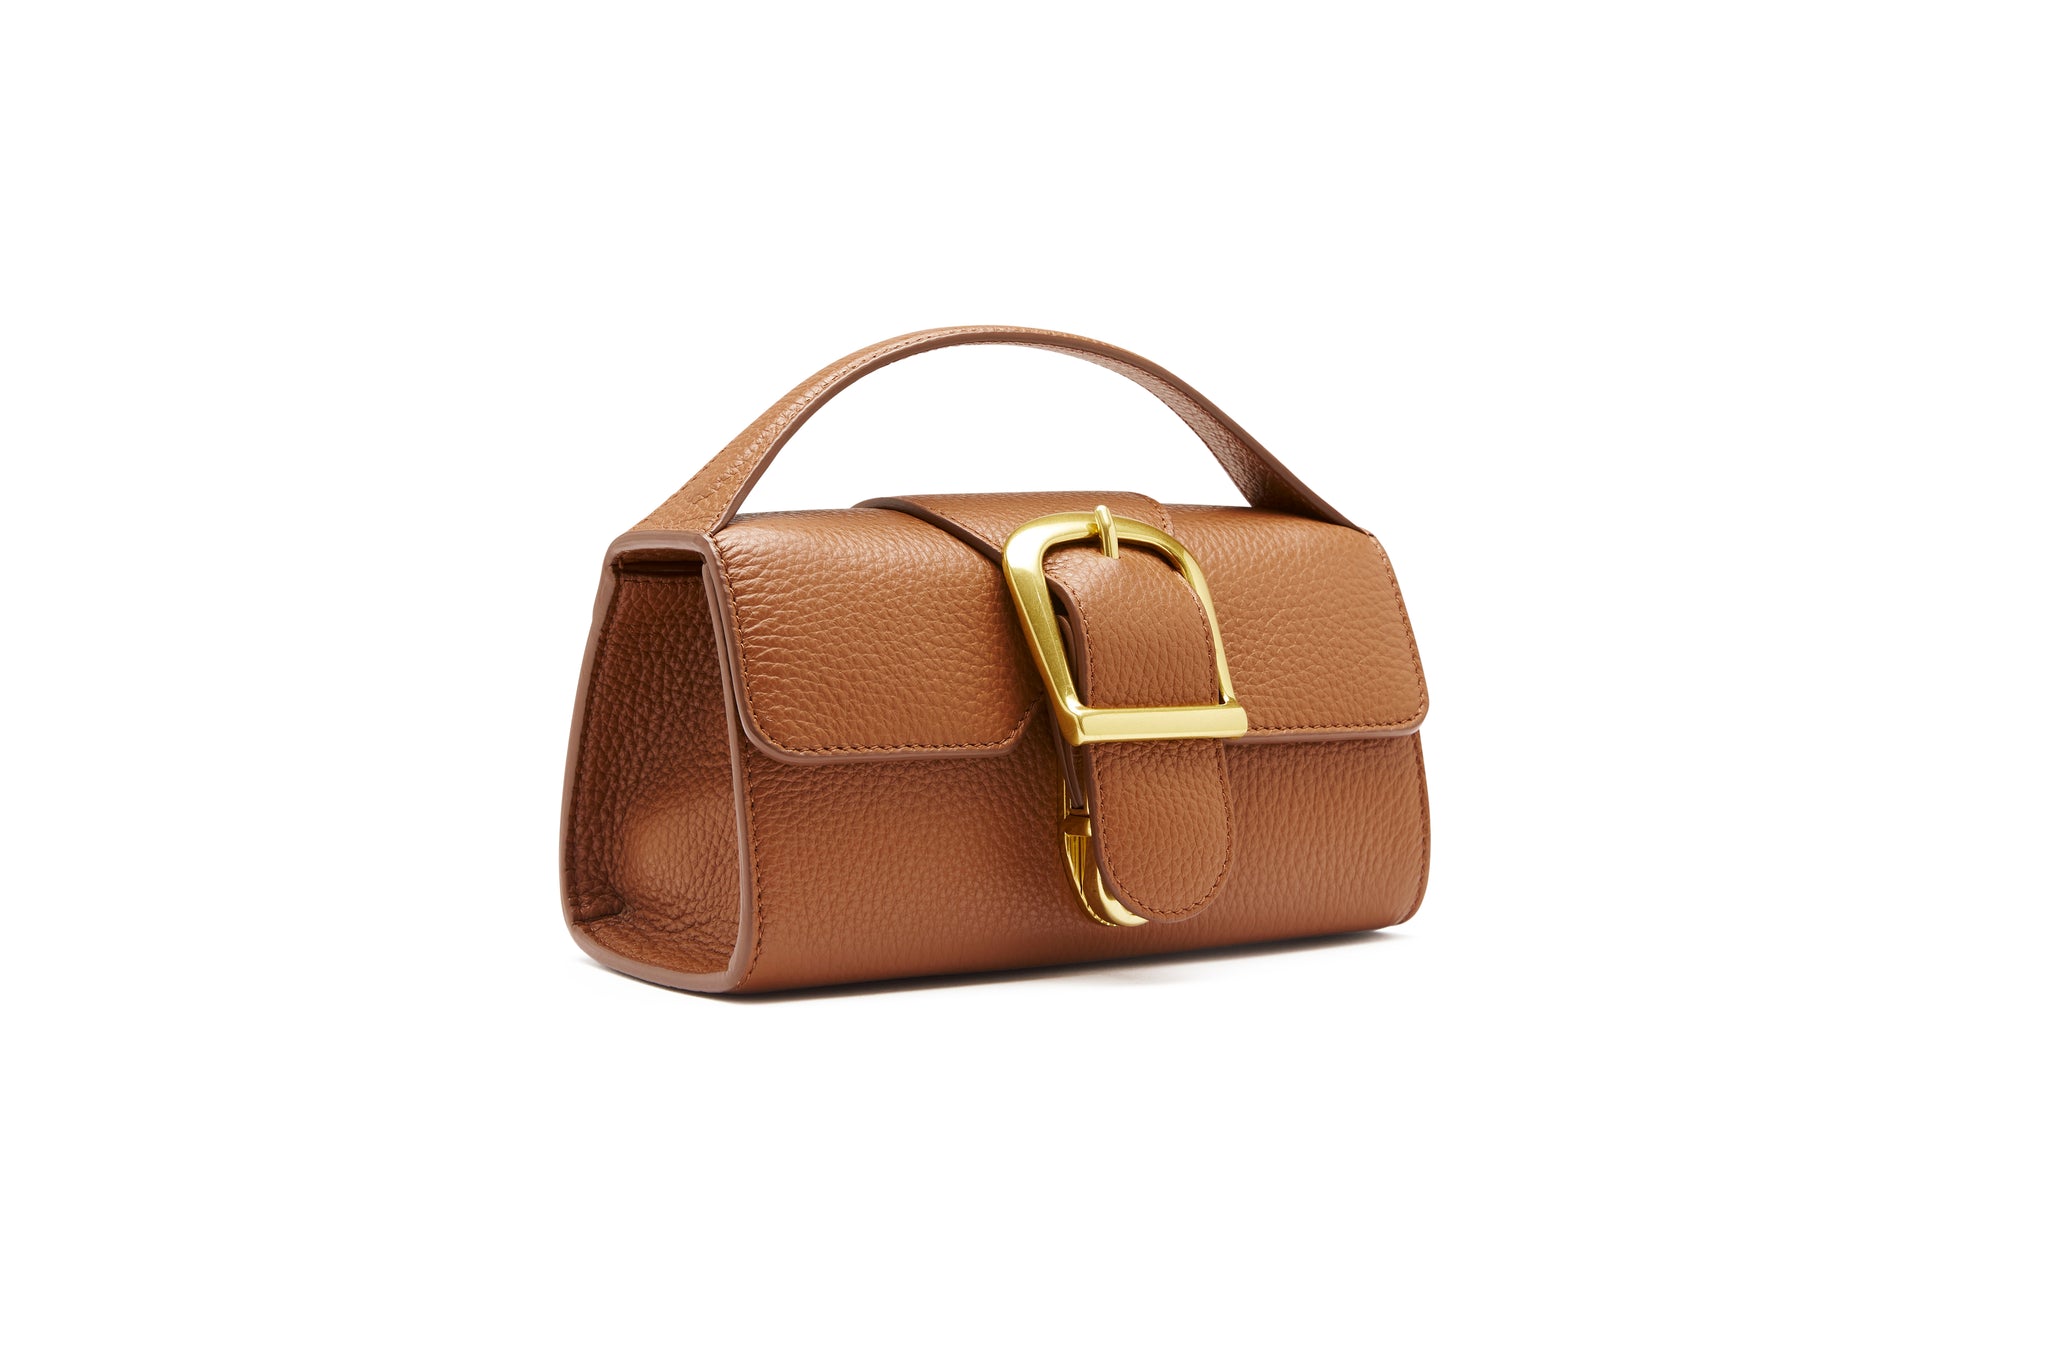 Rylan, Rylan Studio, Caramel Soft Grained Mini Satchel with Flat Handle, Made in Italy